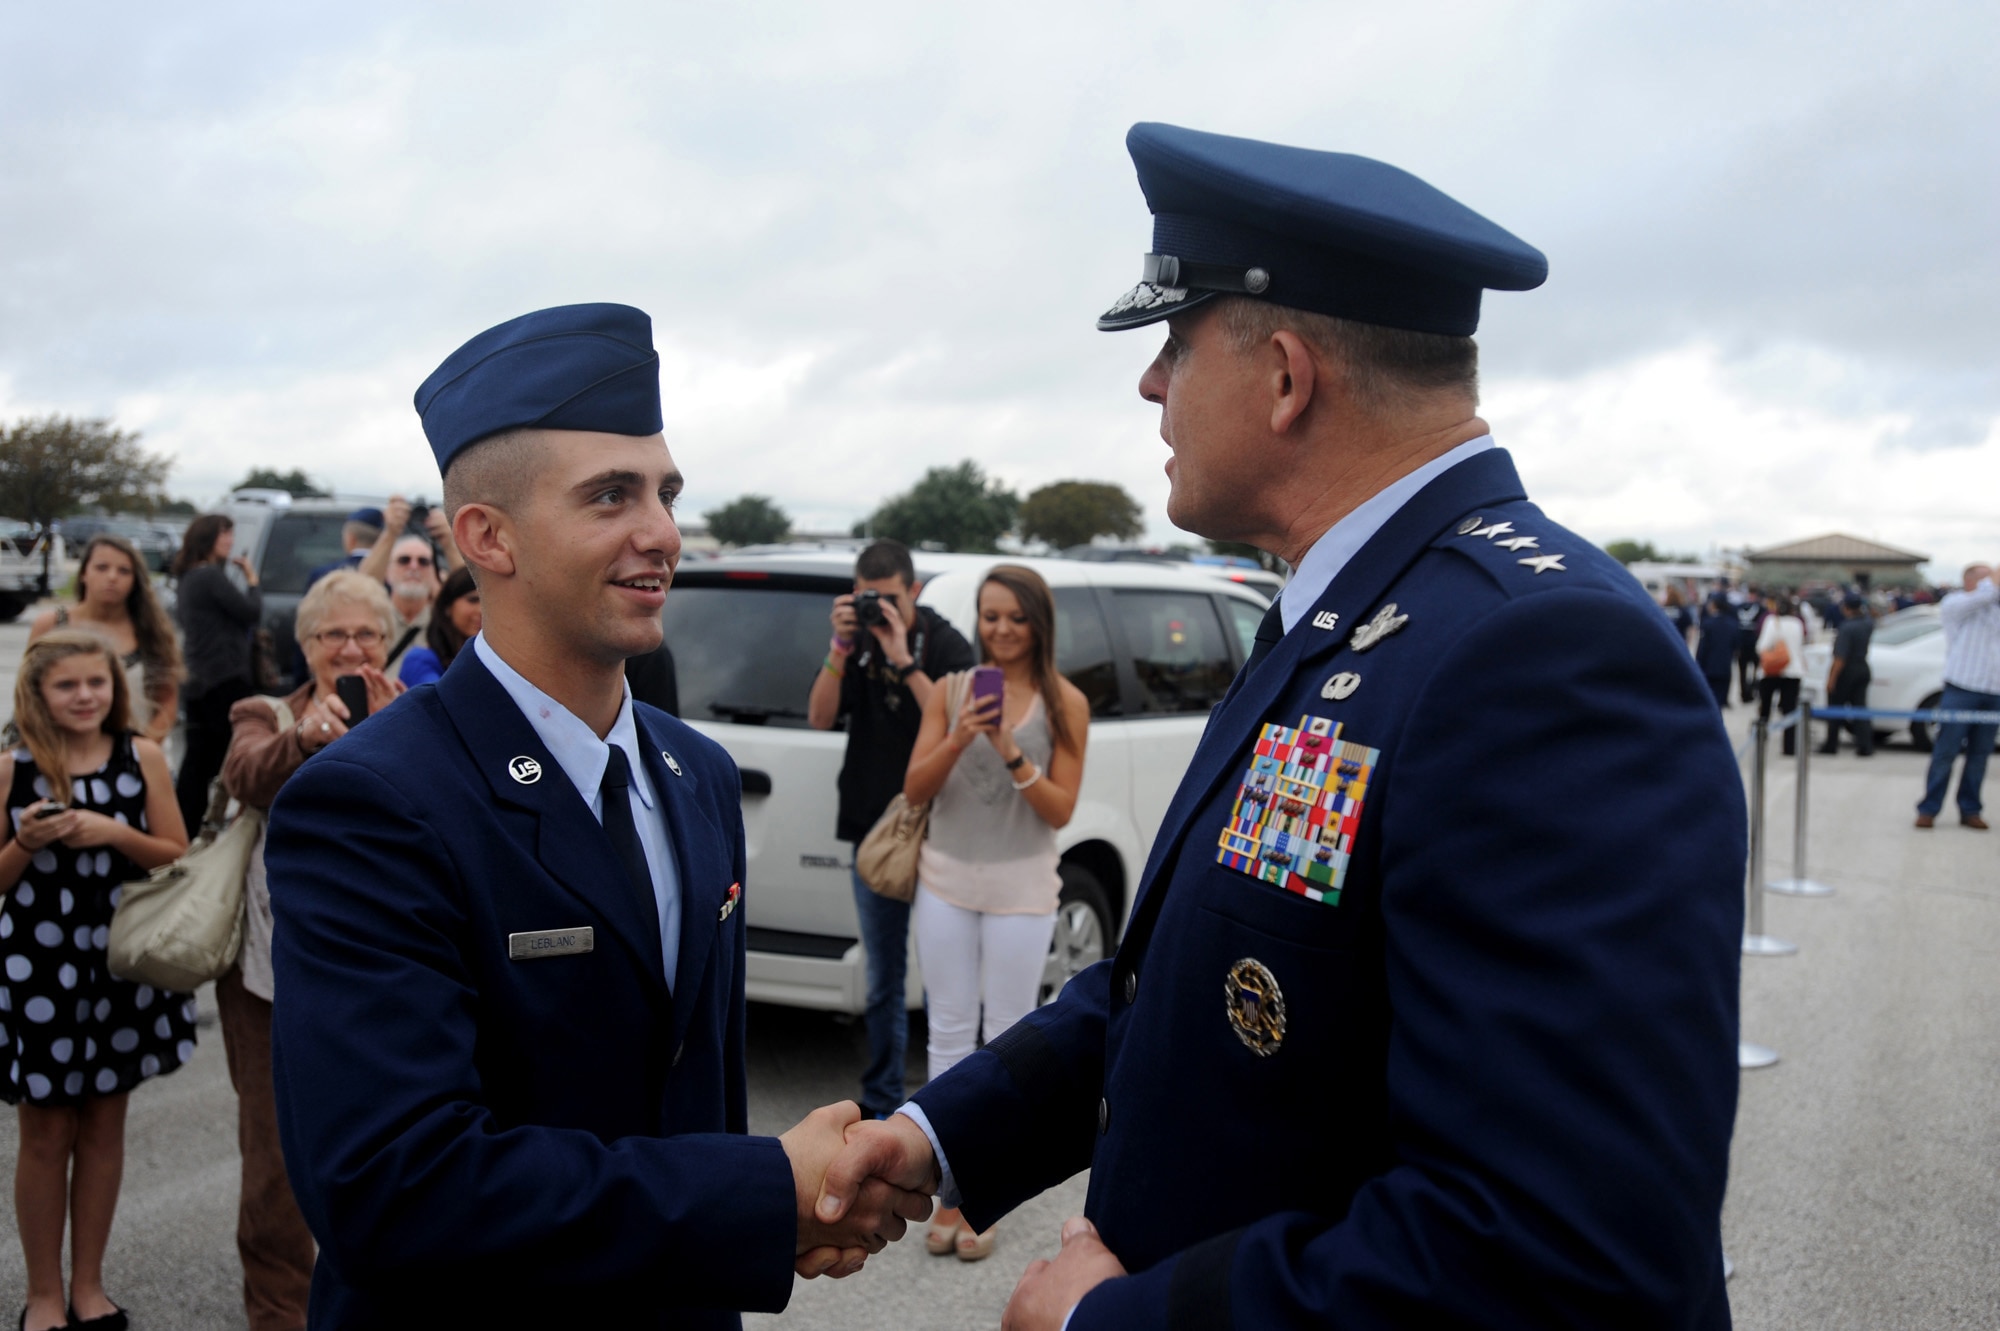 Lt. Gen. Frank Gorenc, Air Force assistant vice chief of staff and director of the Air Staff, congratulates AB Preston R. Leblanc on graduating from Air Force basic military training, at Joint Base San Antonio, TX, Nov. 2. Gen. Gorenc performed the duties of presiding officer at the Airman’s graduation. (U.S. Air Force photo by Tech. Sgt. Sarayuth Pinthong)